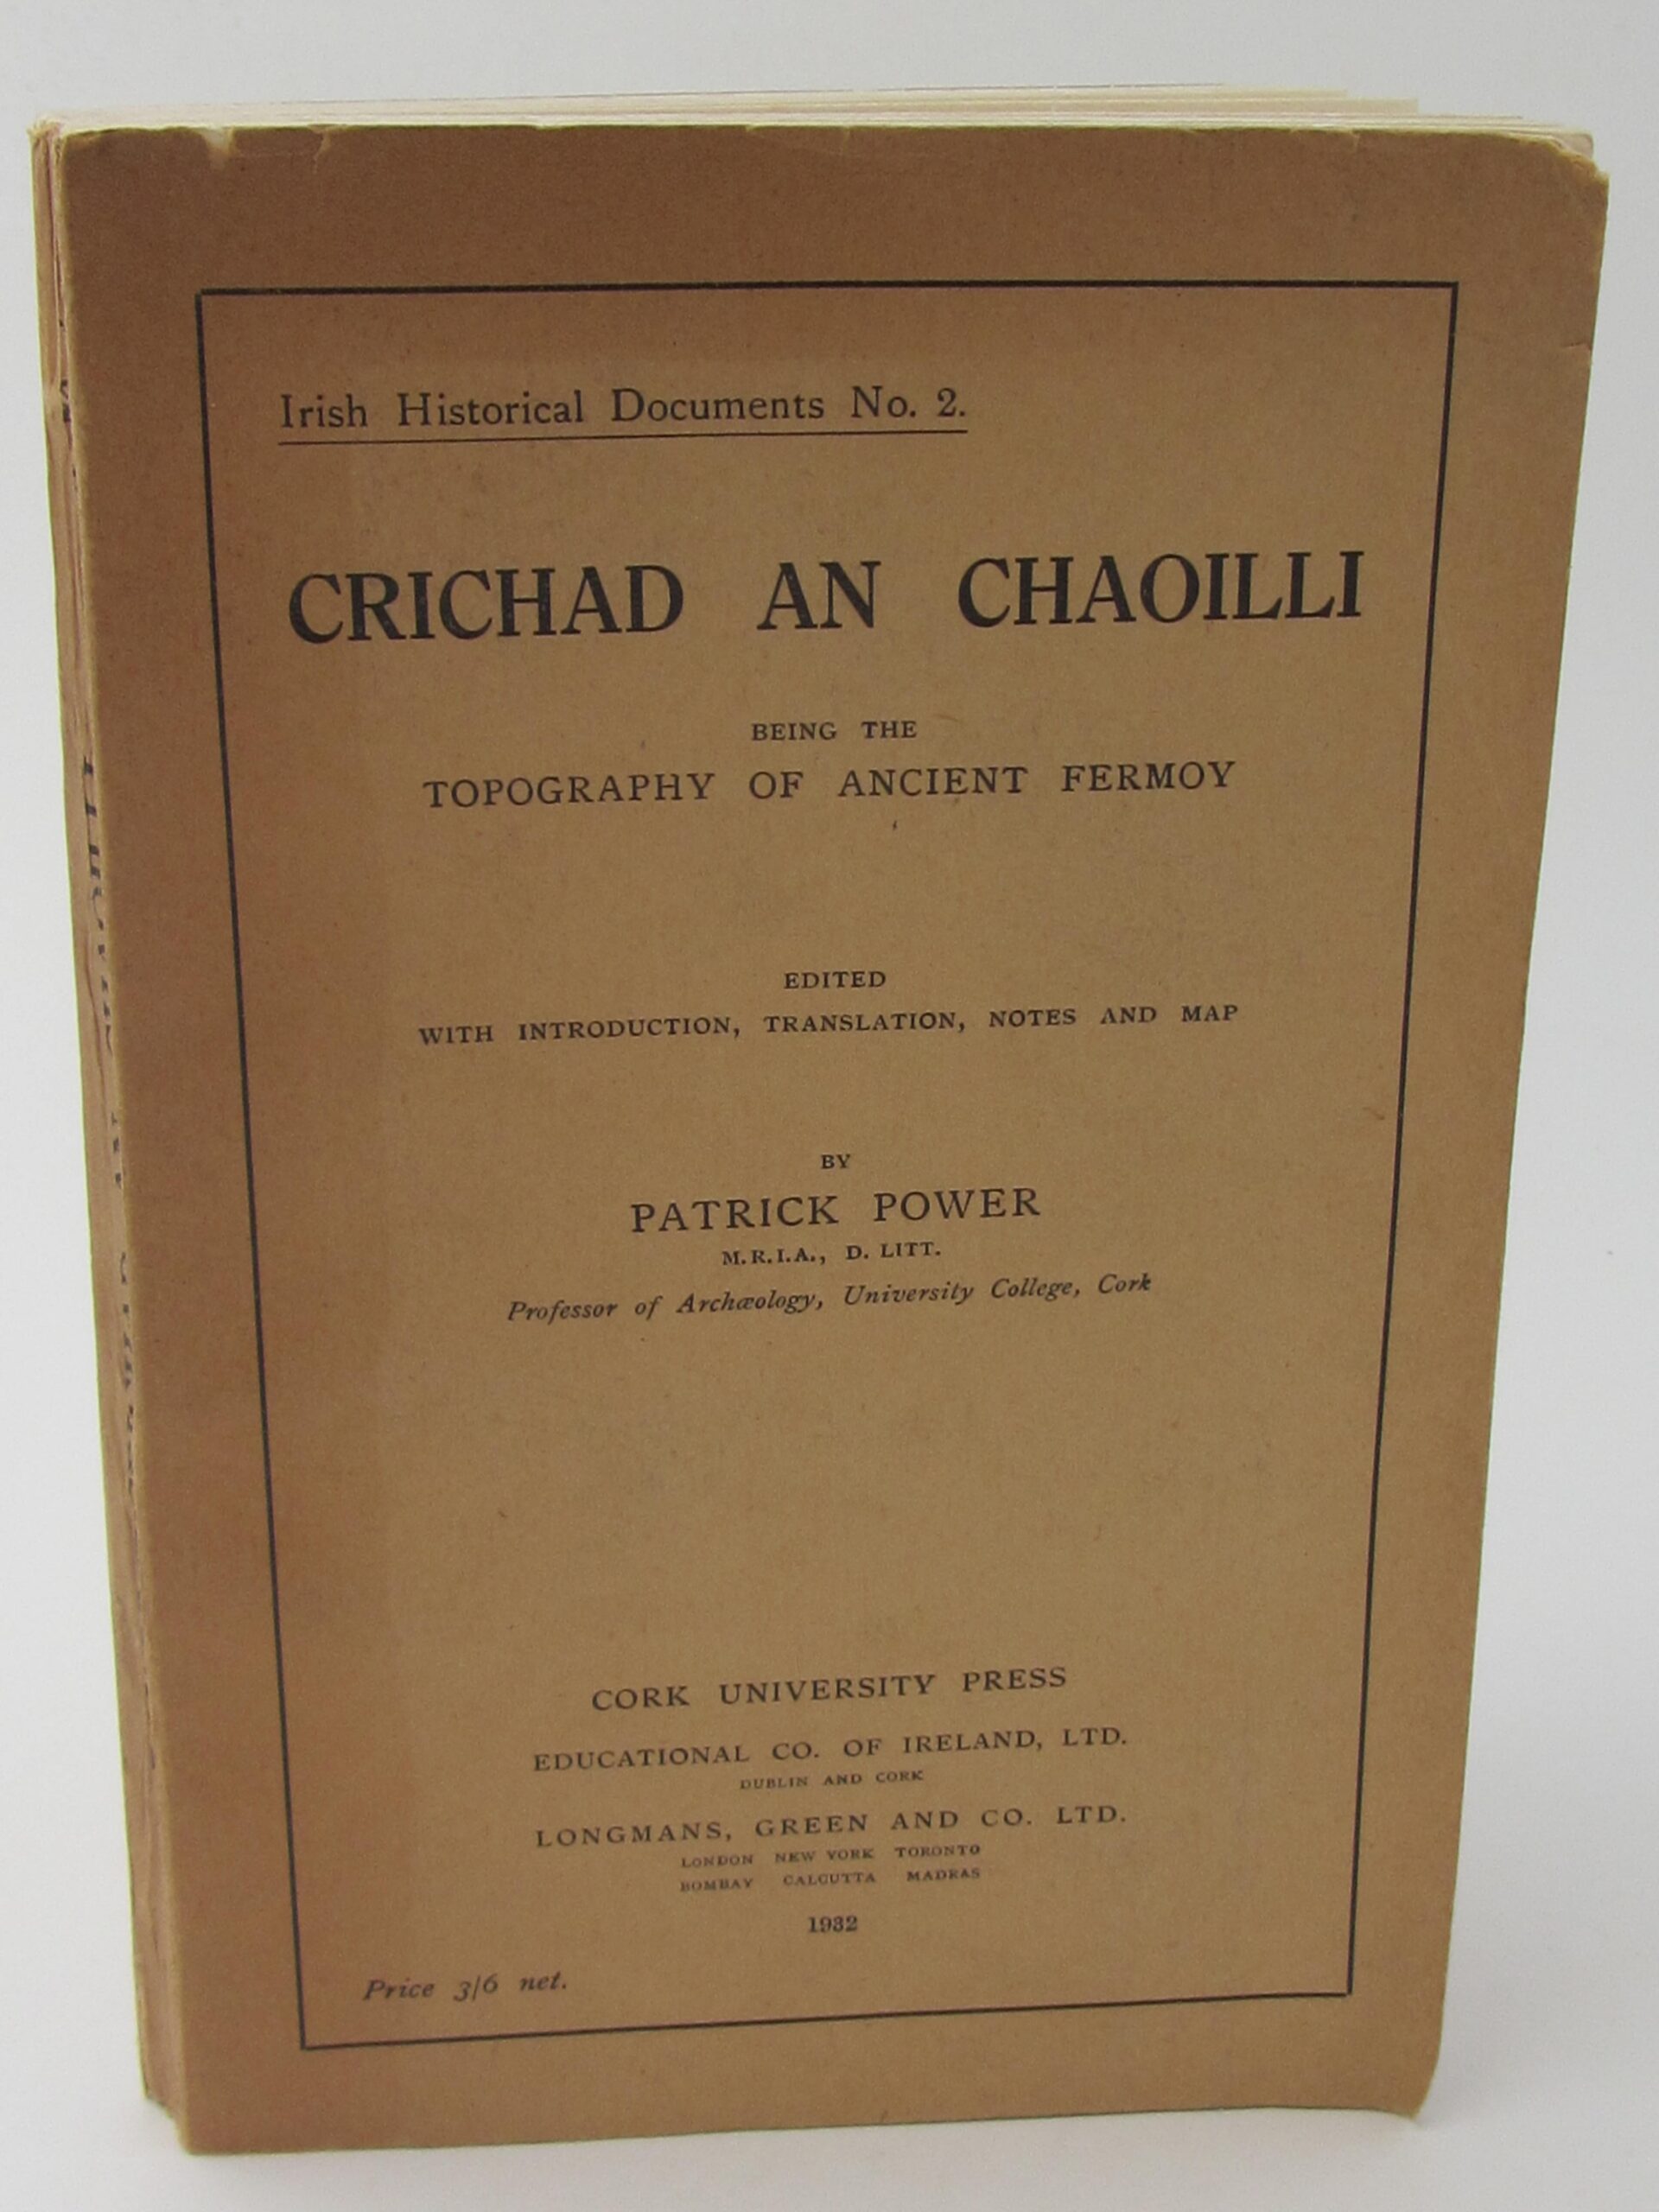 Crichad an Chaoilli: Being the Topography of Ancient Fermoy (1932) by Patrick Power